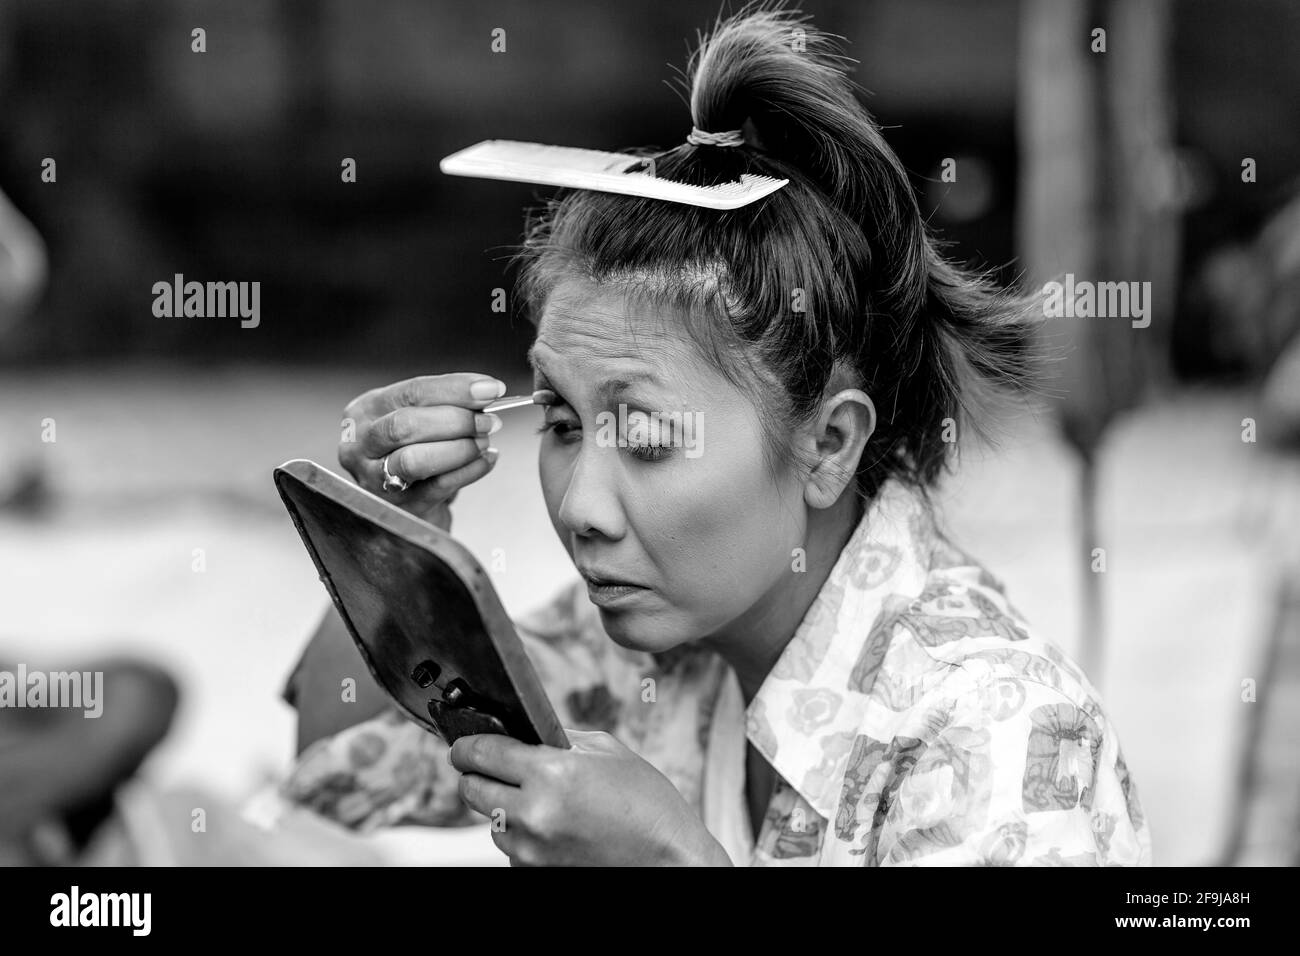 A Woman Applies Make Up Before Performing In A Traditional Balinese Barong and Kris Dance Show, Batabulan, Bali, Indonesia. Stock Photo